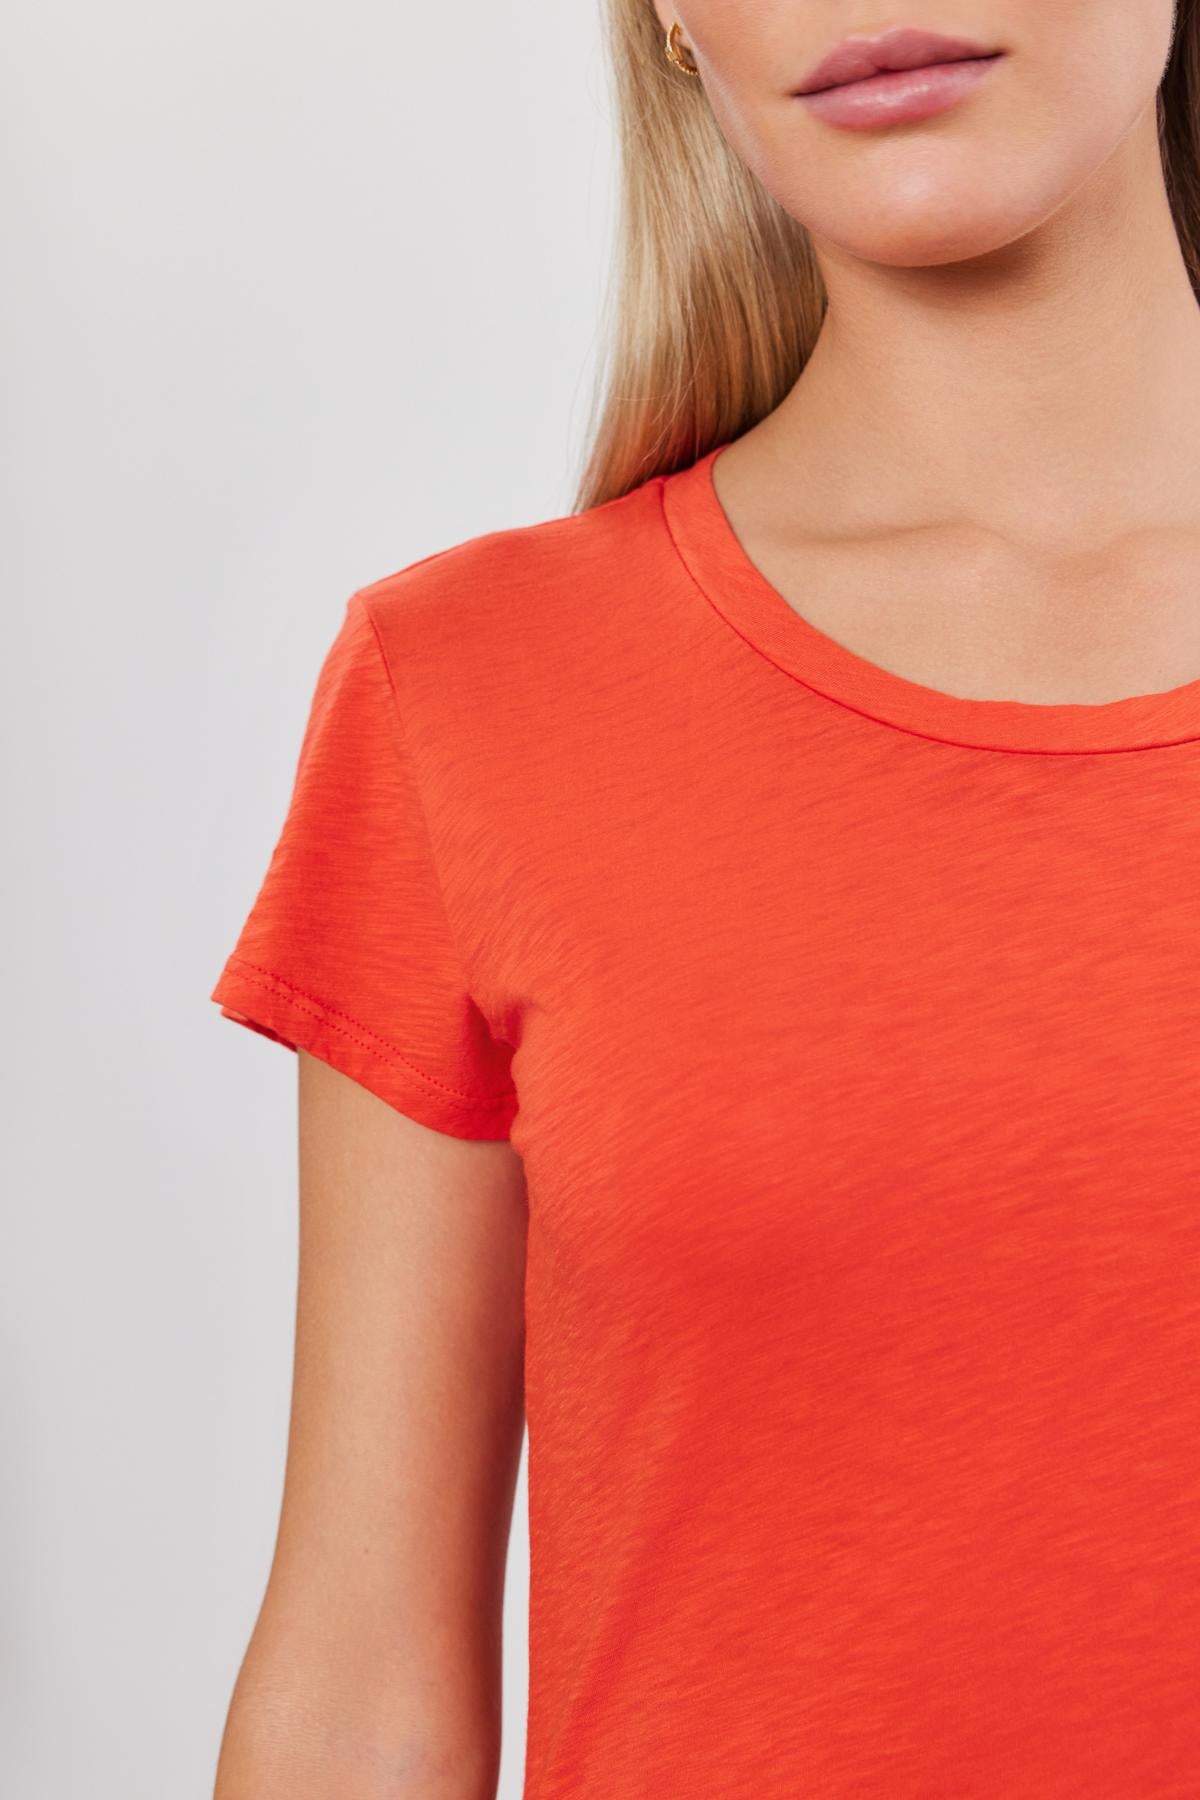 Close-up of a woman wearing a bright red ODELIA COTTON SLUB CREW NECK TEE by Velvet by Graham & Spencer, focusing on the shoulder and neckline details.-36910072529089